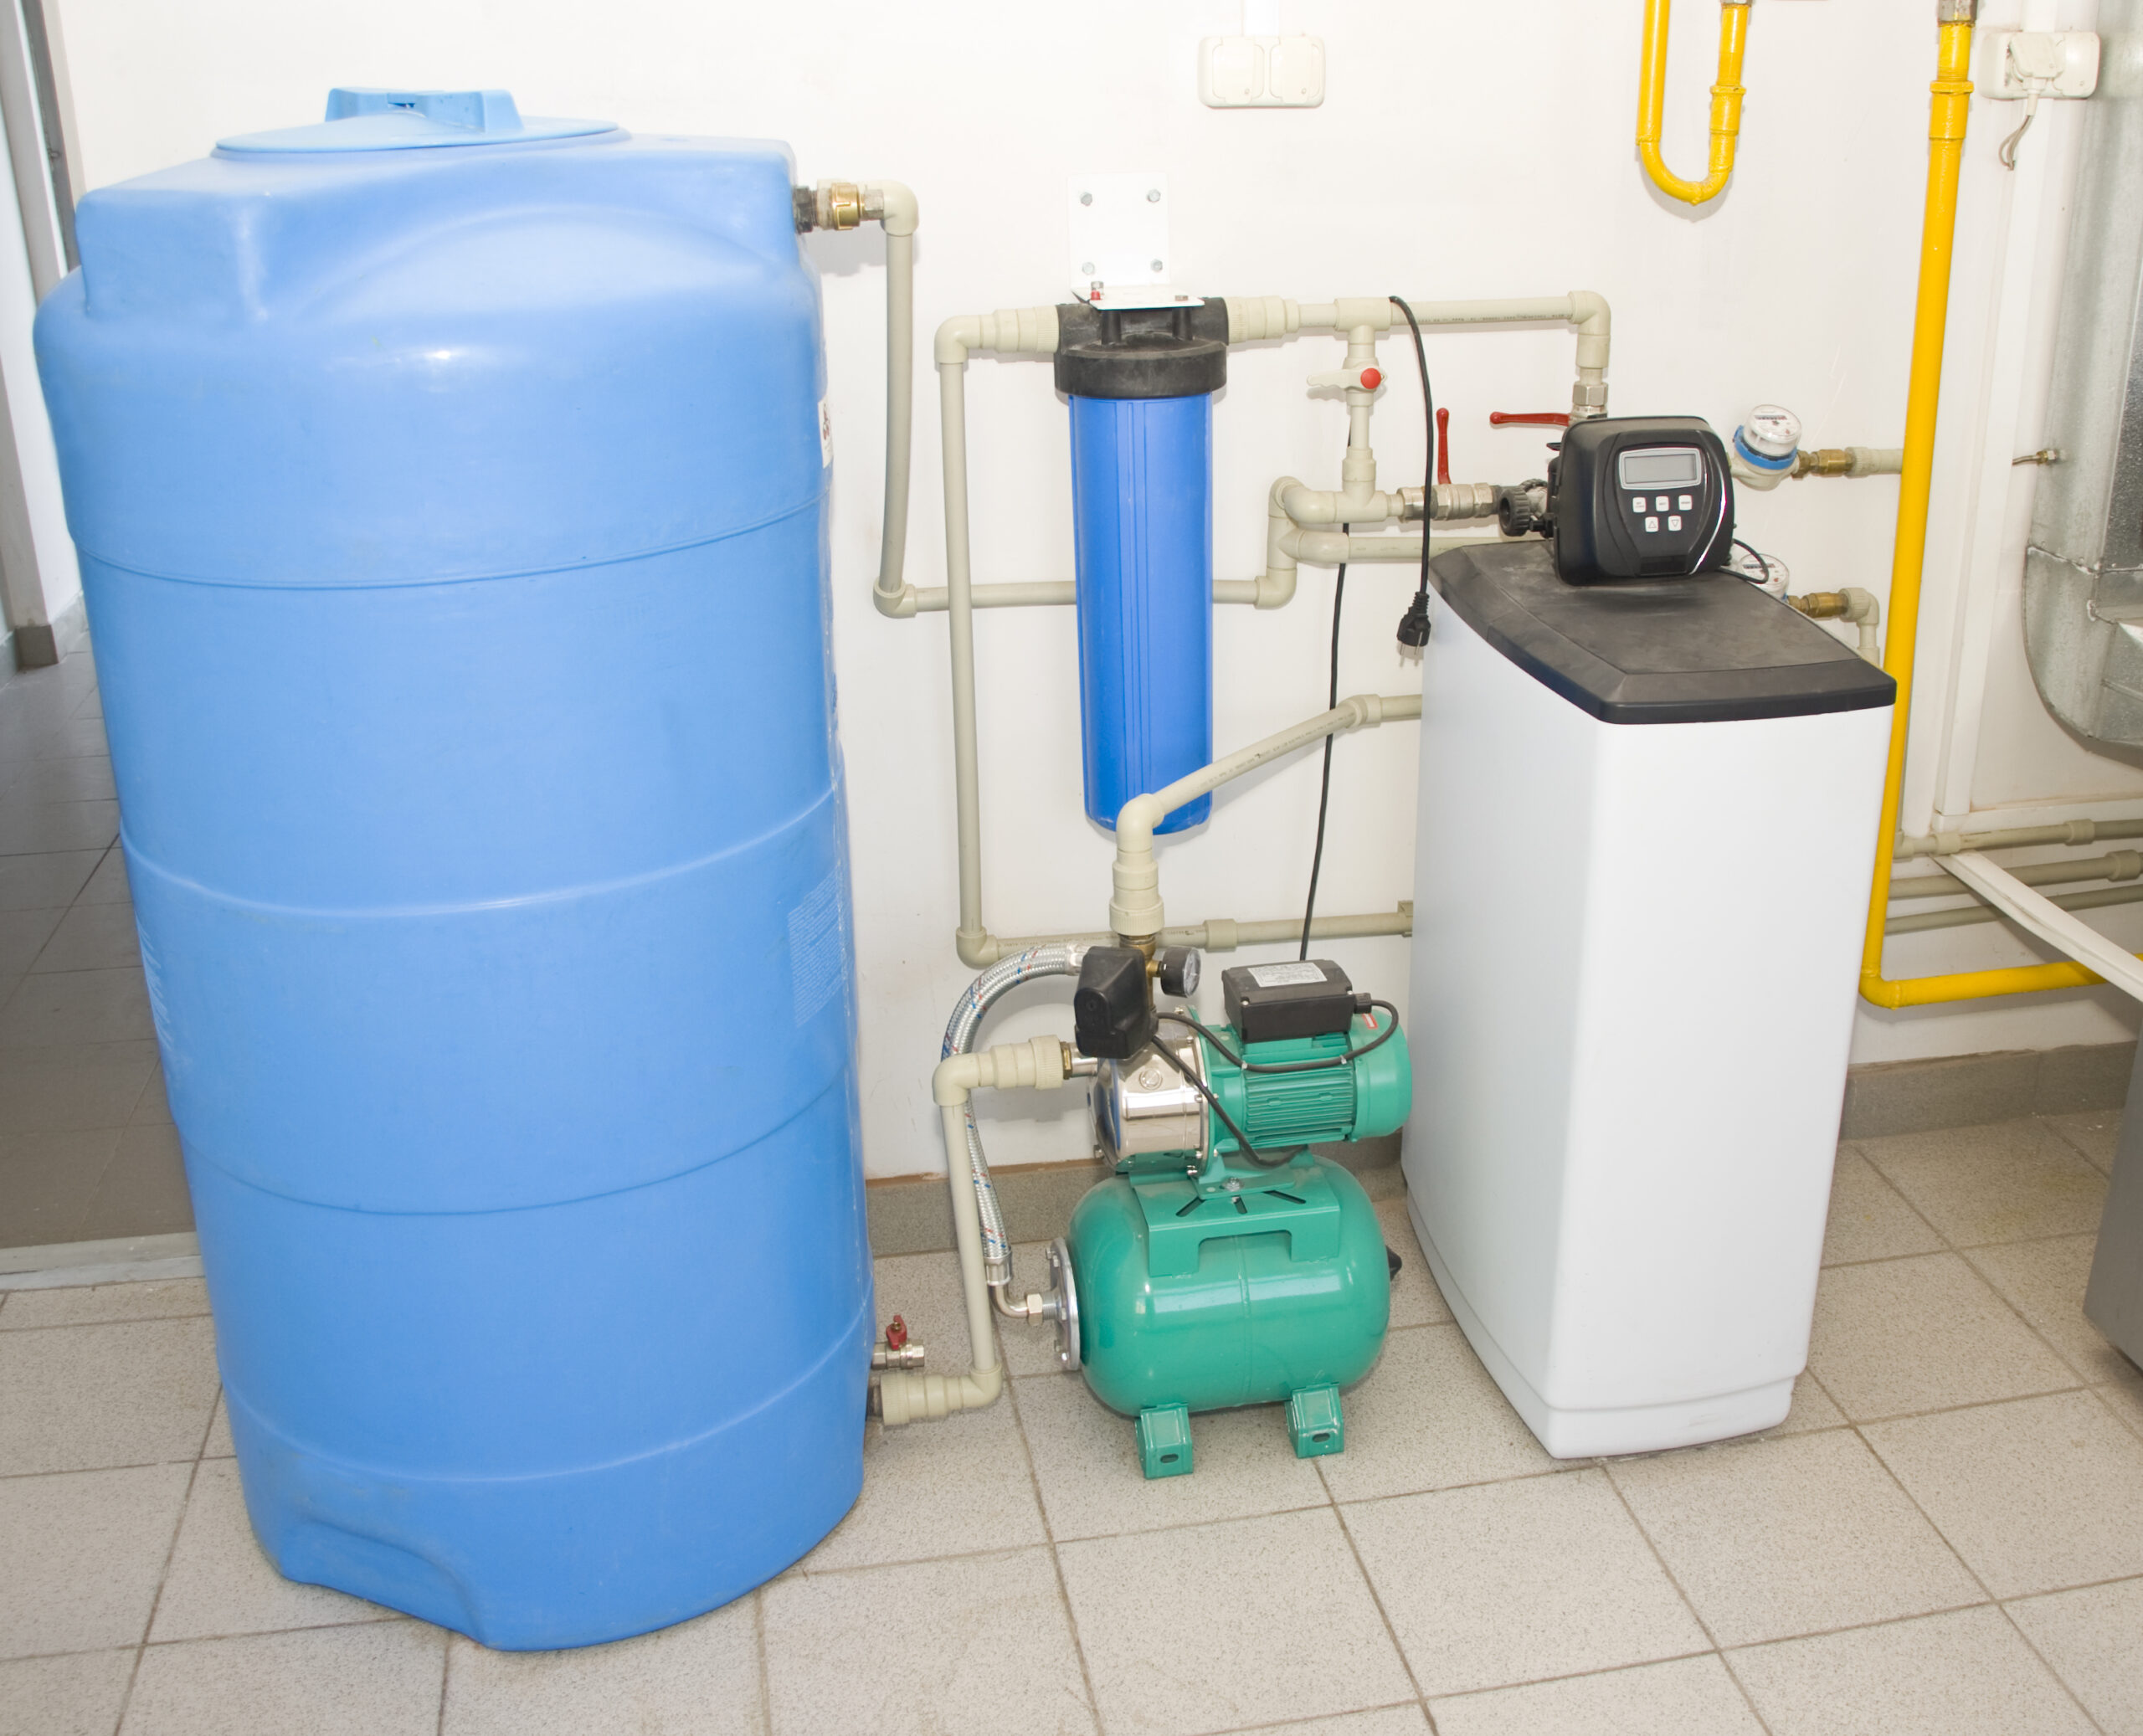 Image of a pool filter machine, used for cleaning and purifying pool water.